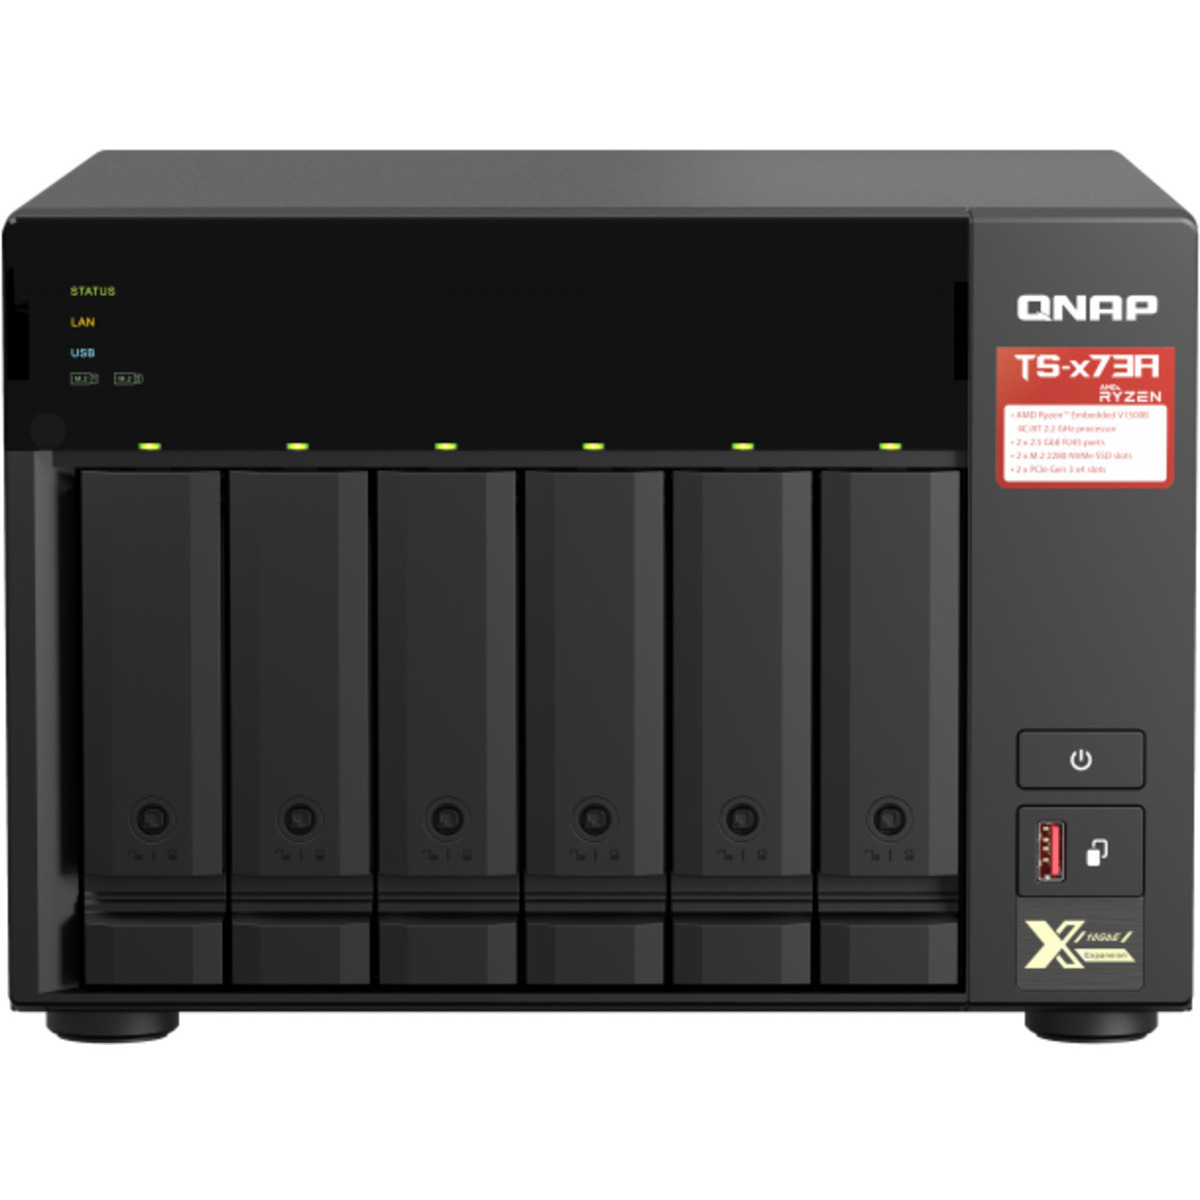 buy $3852 QNAP TS-673A 108tb Desktop NAS - Network Attached Storage Device 6x18000gb Toshiba Enterprise Capacity MG09ACA18TE 3.5 7200rpm SATA 6Gb/s HDD ENTERPRISE Class Drives Installed - Burn-In Tested - nas headquarters buy network attached storage server device das new raid-5 free shipping usa christmas new year holiday sale TS-673A